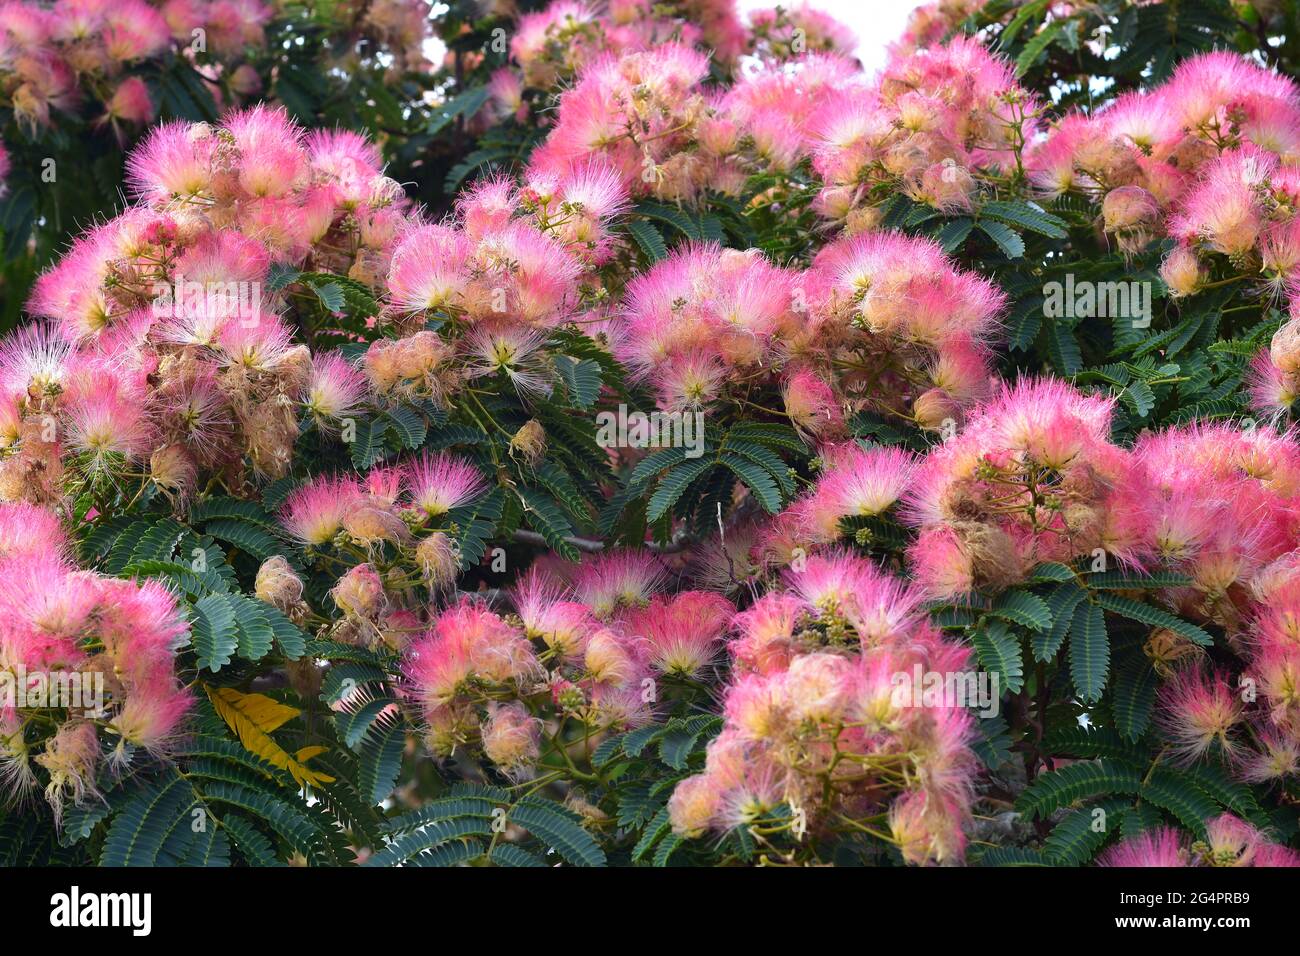 Pink fluffy compound flowers of mimosa Albizia julibrissin in full bloom. Stock Photo